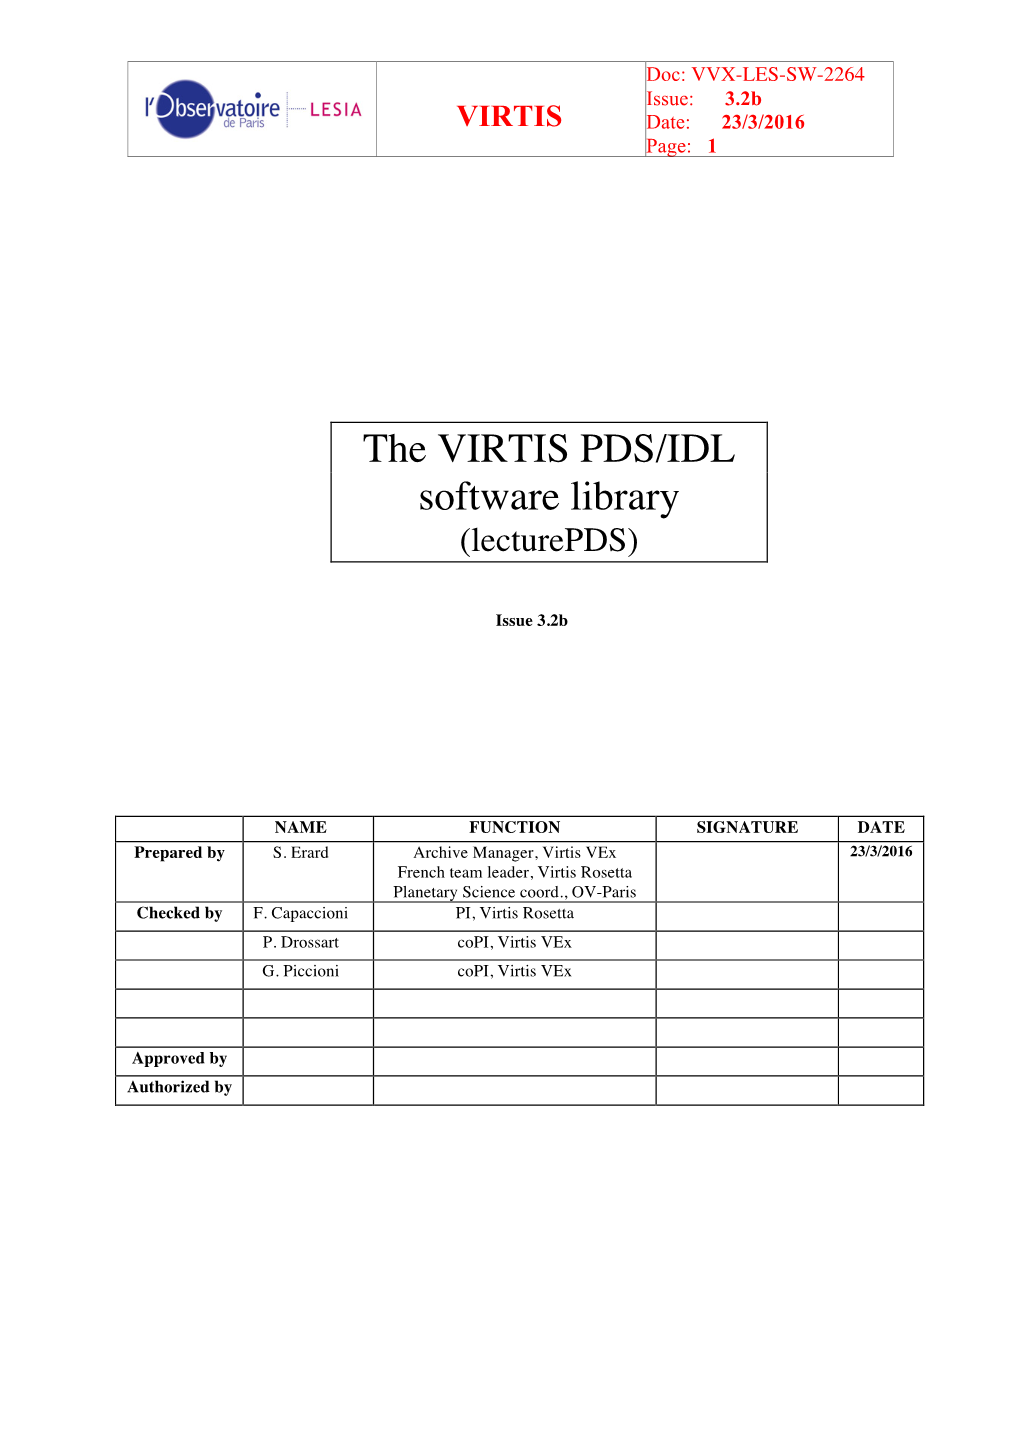 The VIRTIS PDS/IDL Software Library (Lecturepds)